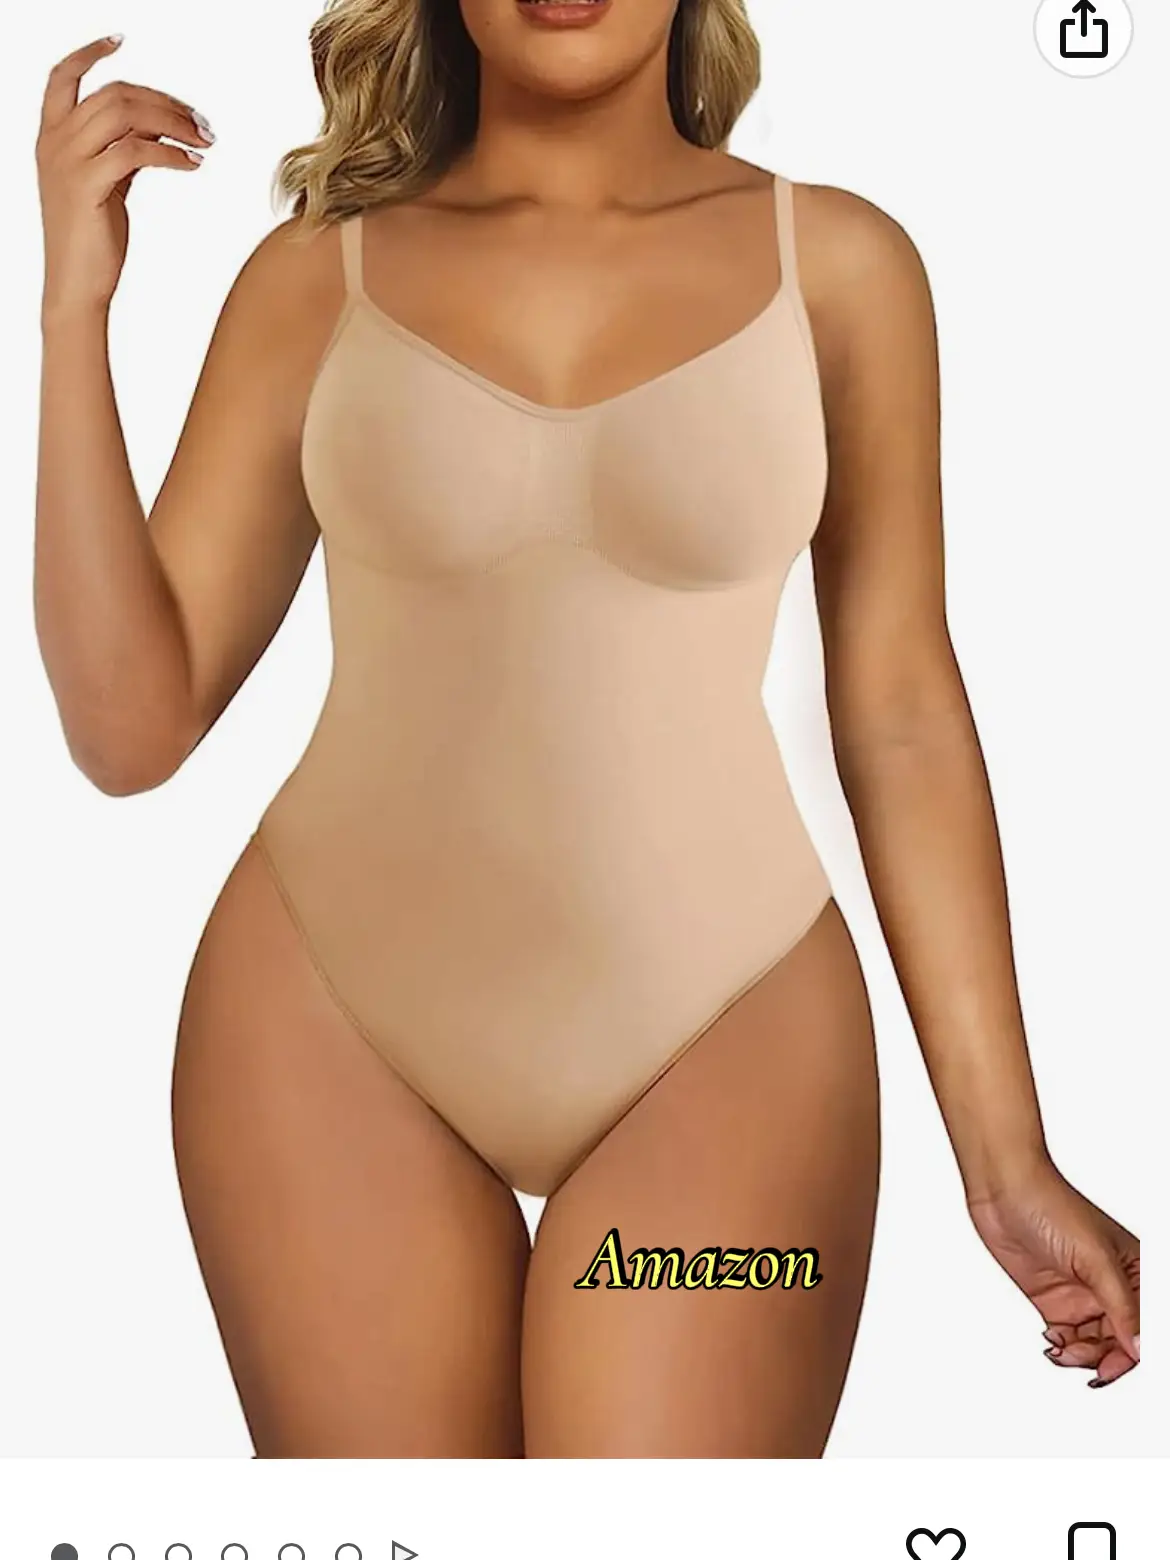 New arrival😎💕Buy it to get your hourglass figure💃 #shapewear